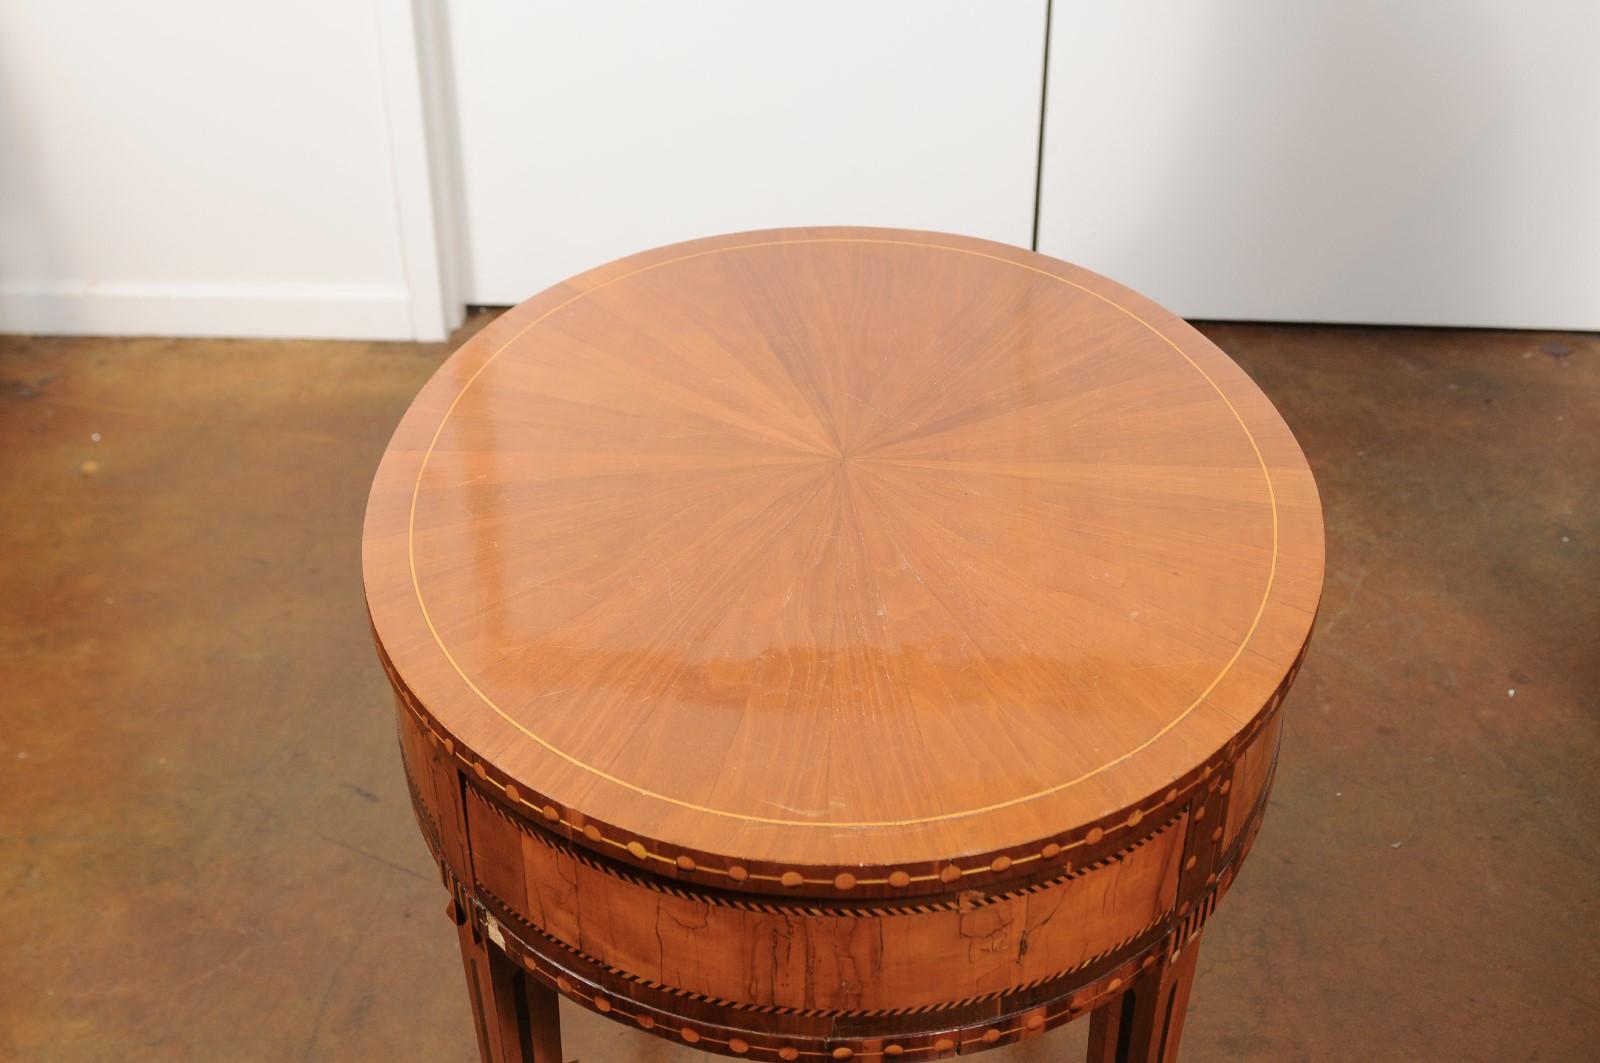 French 19th Century Oval Walnut and Satinwood Inlaid Table with Radiating Veneer 4